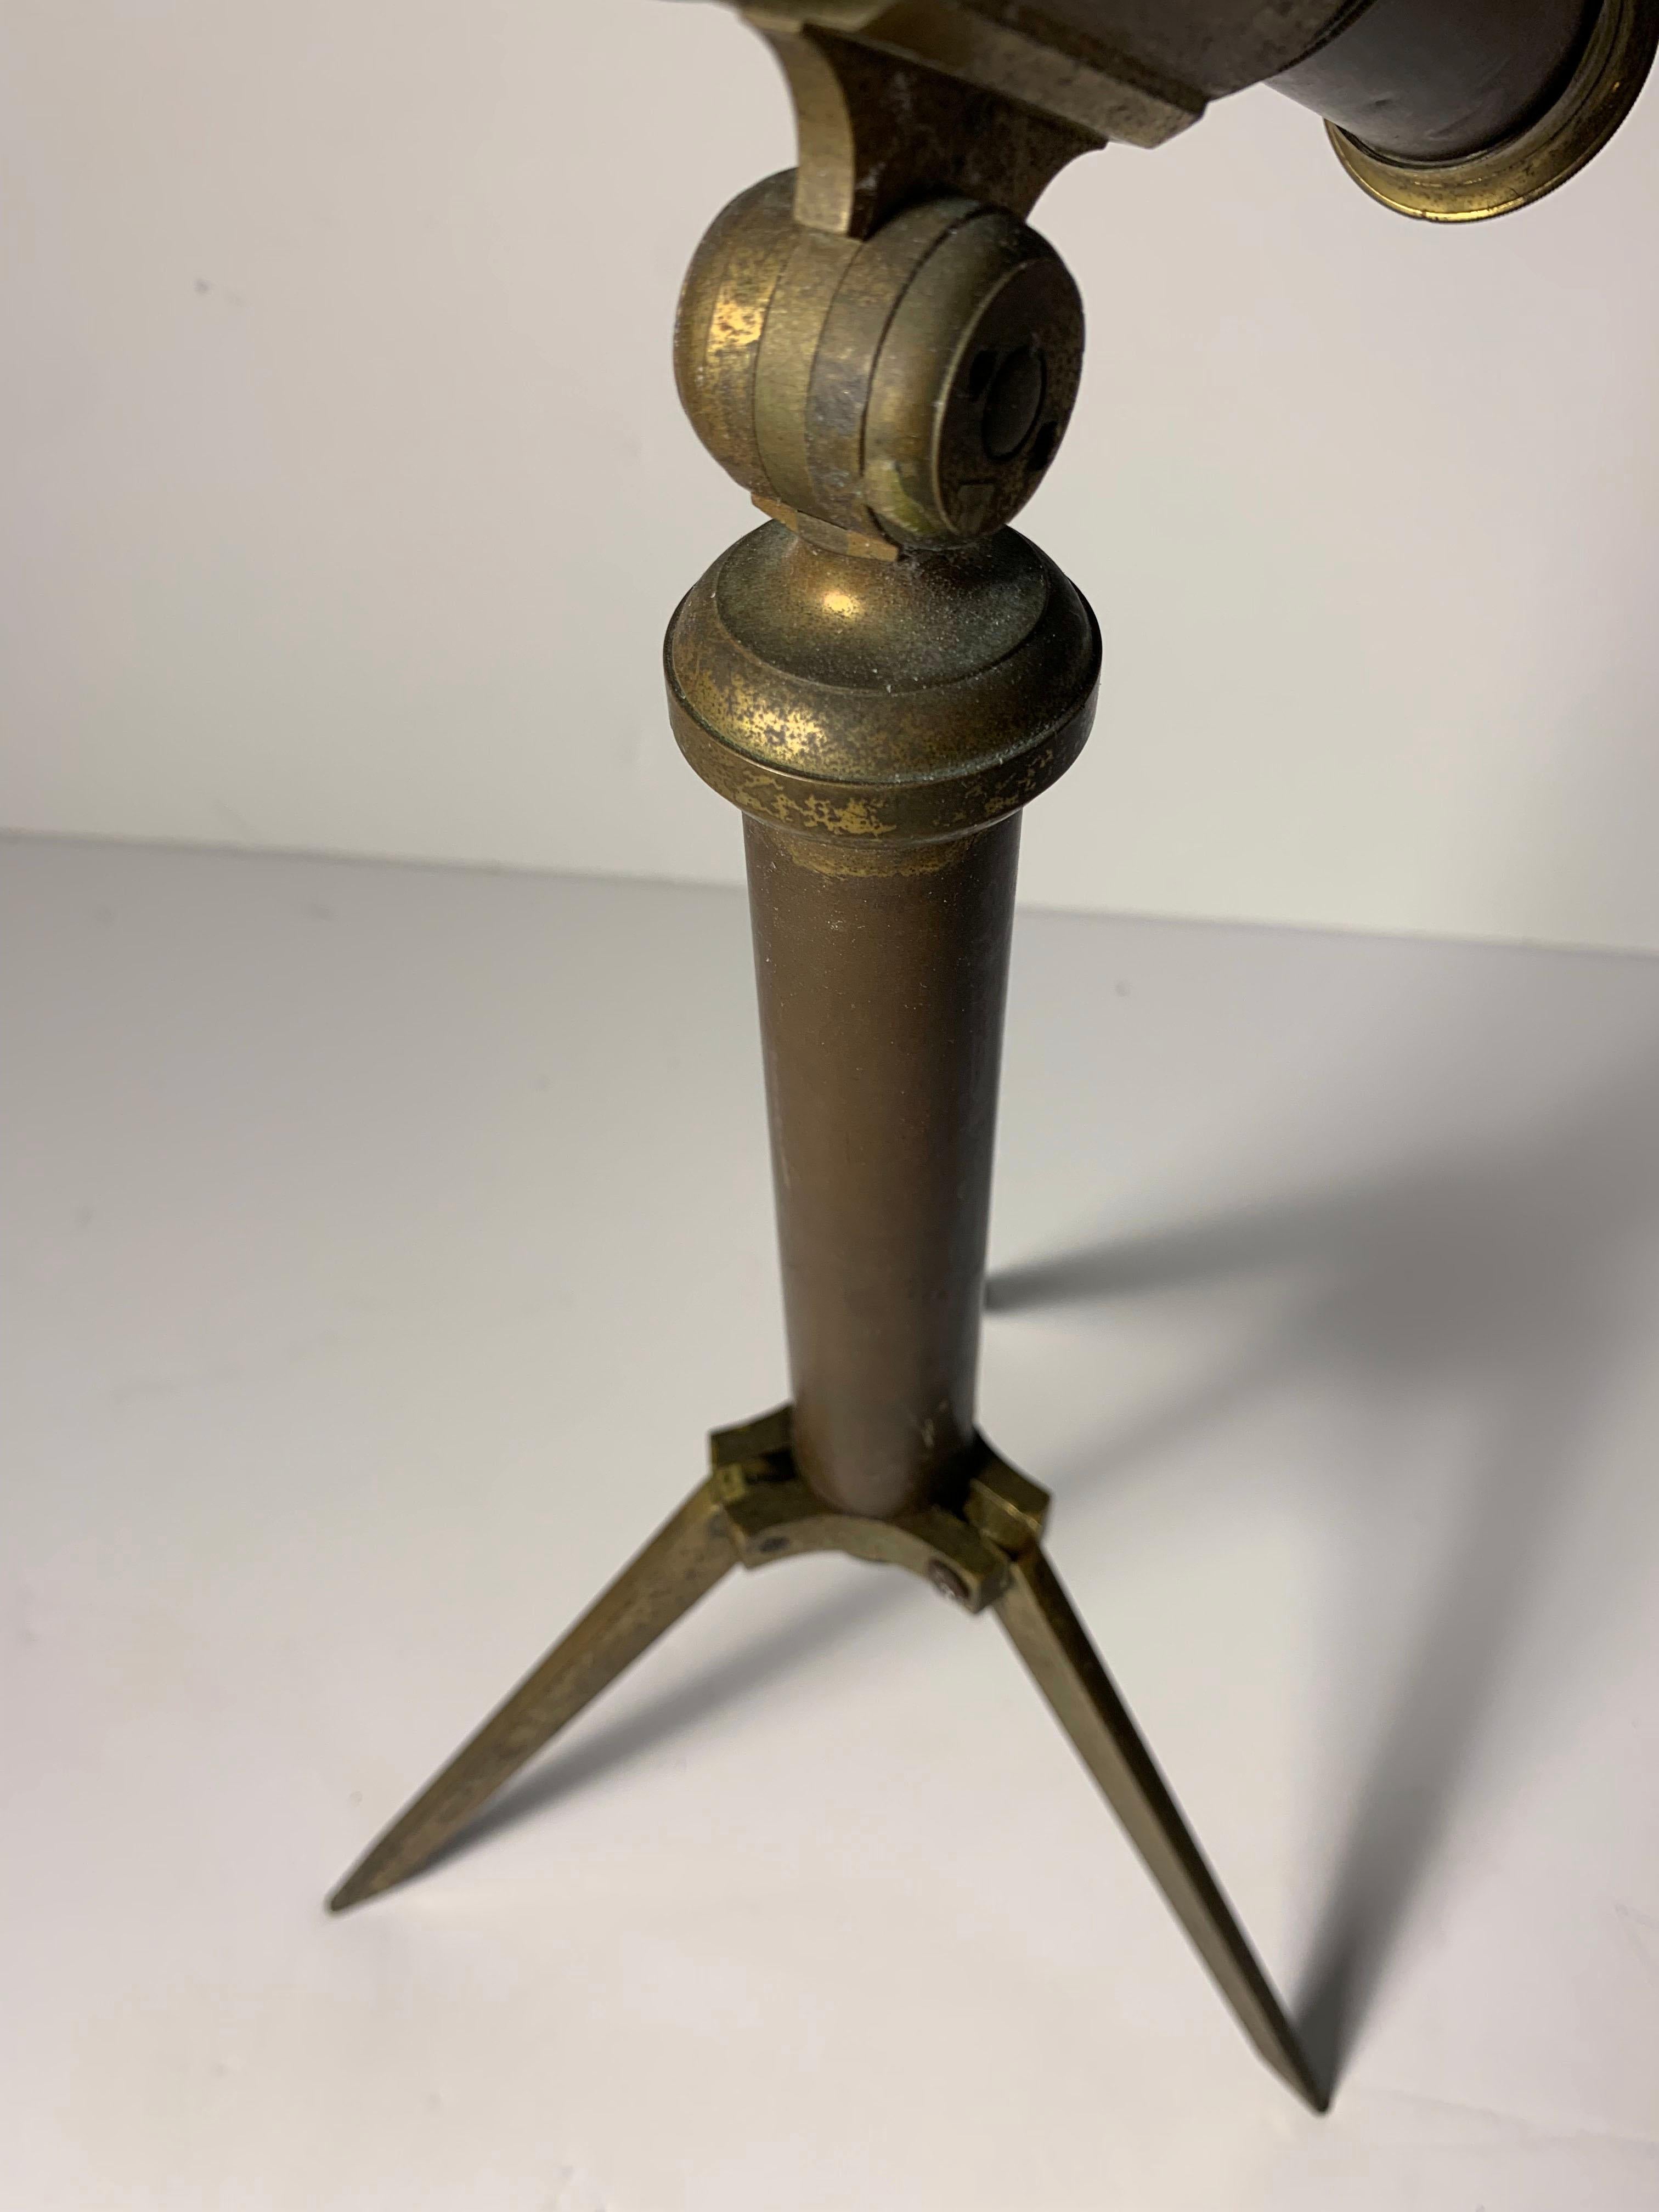 Charming Vintage Gentleman's Library Telescope In Fair Condition For Sale In Chicago, IL